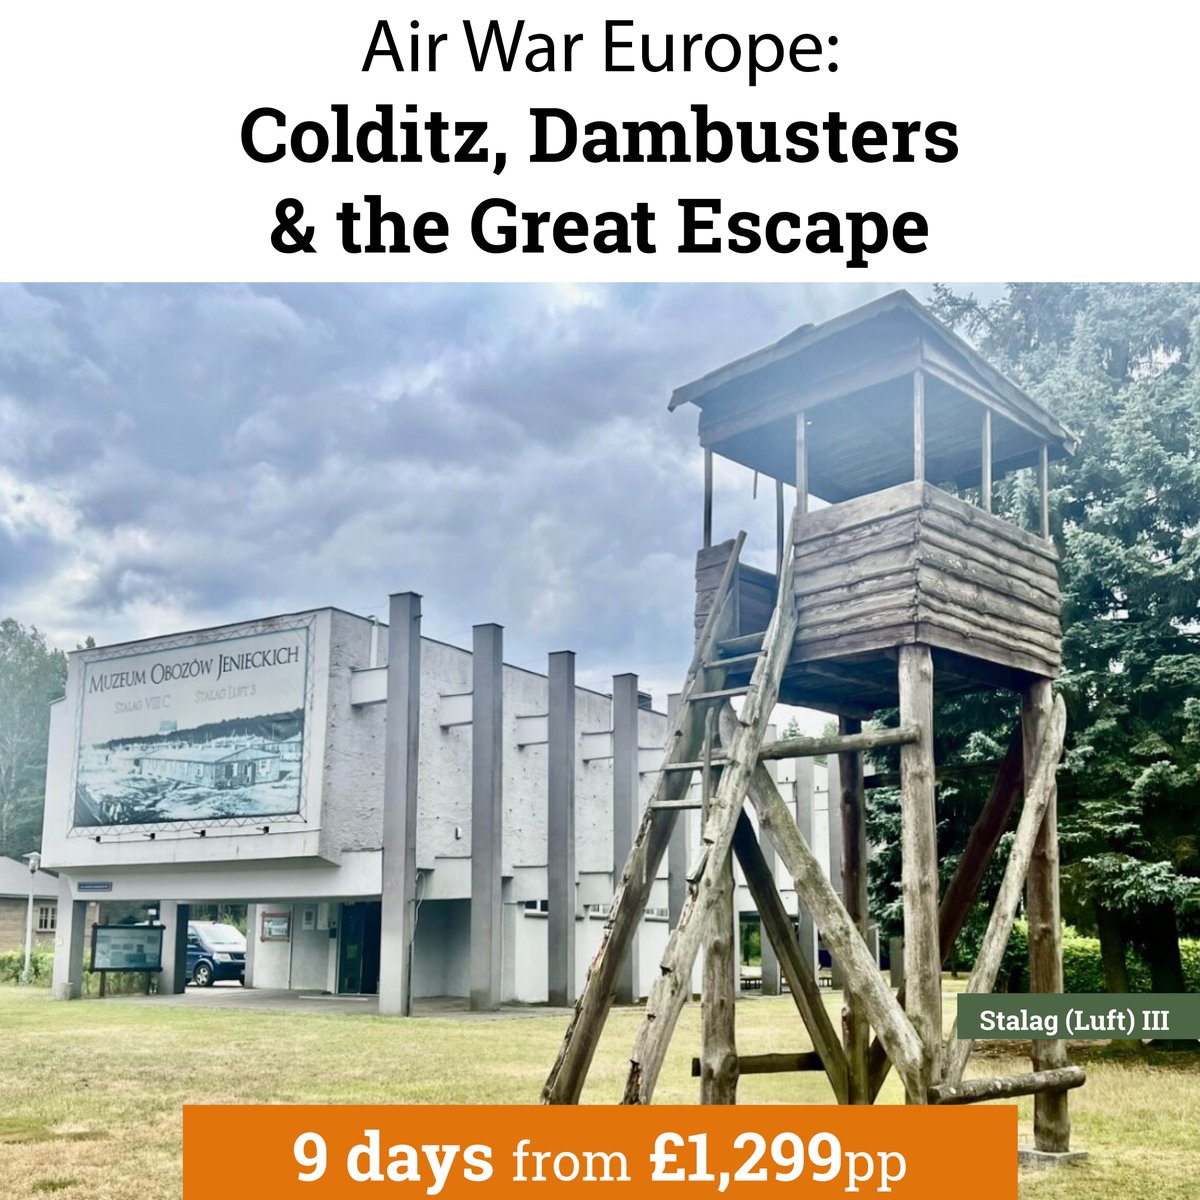 On this day in 1944, 76 Allied airmen escaped the Stalag Luft III POW camp in what is now known as one of history’s most famous prison breaks! Accompanied by a Specialist Guide, visit the real sites where the events unfolded on our 9-day tour >> ow.ly/U0Le50QVo9t ‌